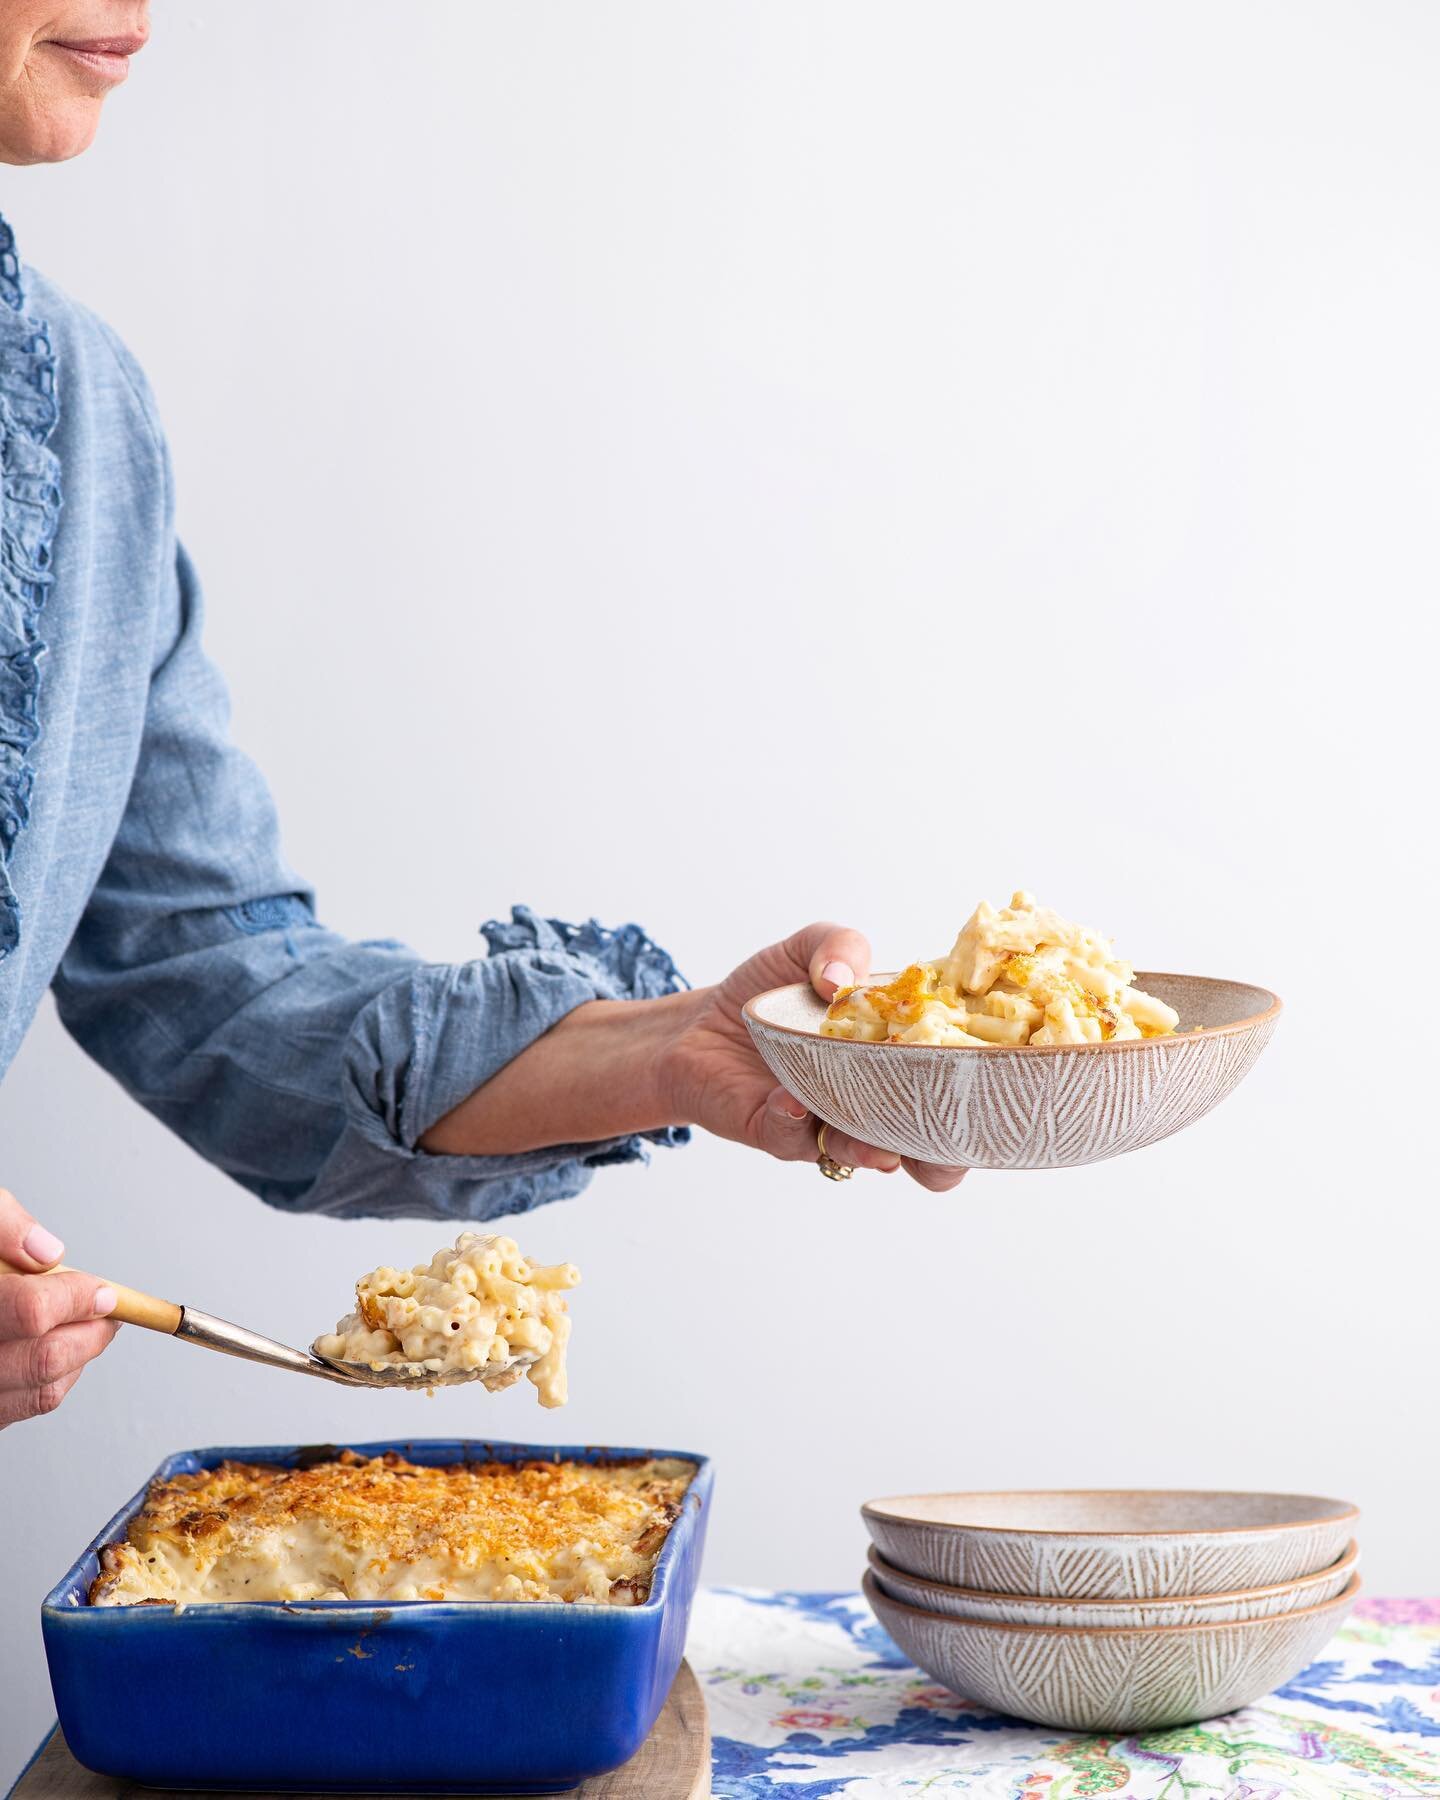 Anyone craving a gooey, creamy, comforting Mac &amp; Cheese? Scroll ⬇️ for the recipe if you are 🤸&zwj;♀️ 

It&rsquo;s from my latest book In Minutes. I have so many variations on this ultimate comfort food that I feel I could write a whole book on 